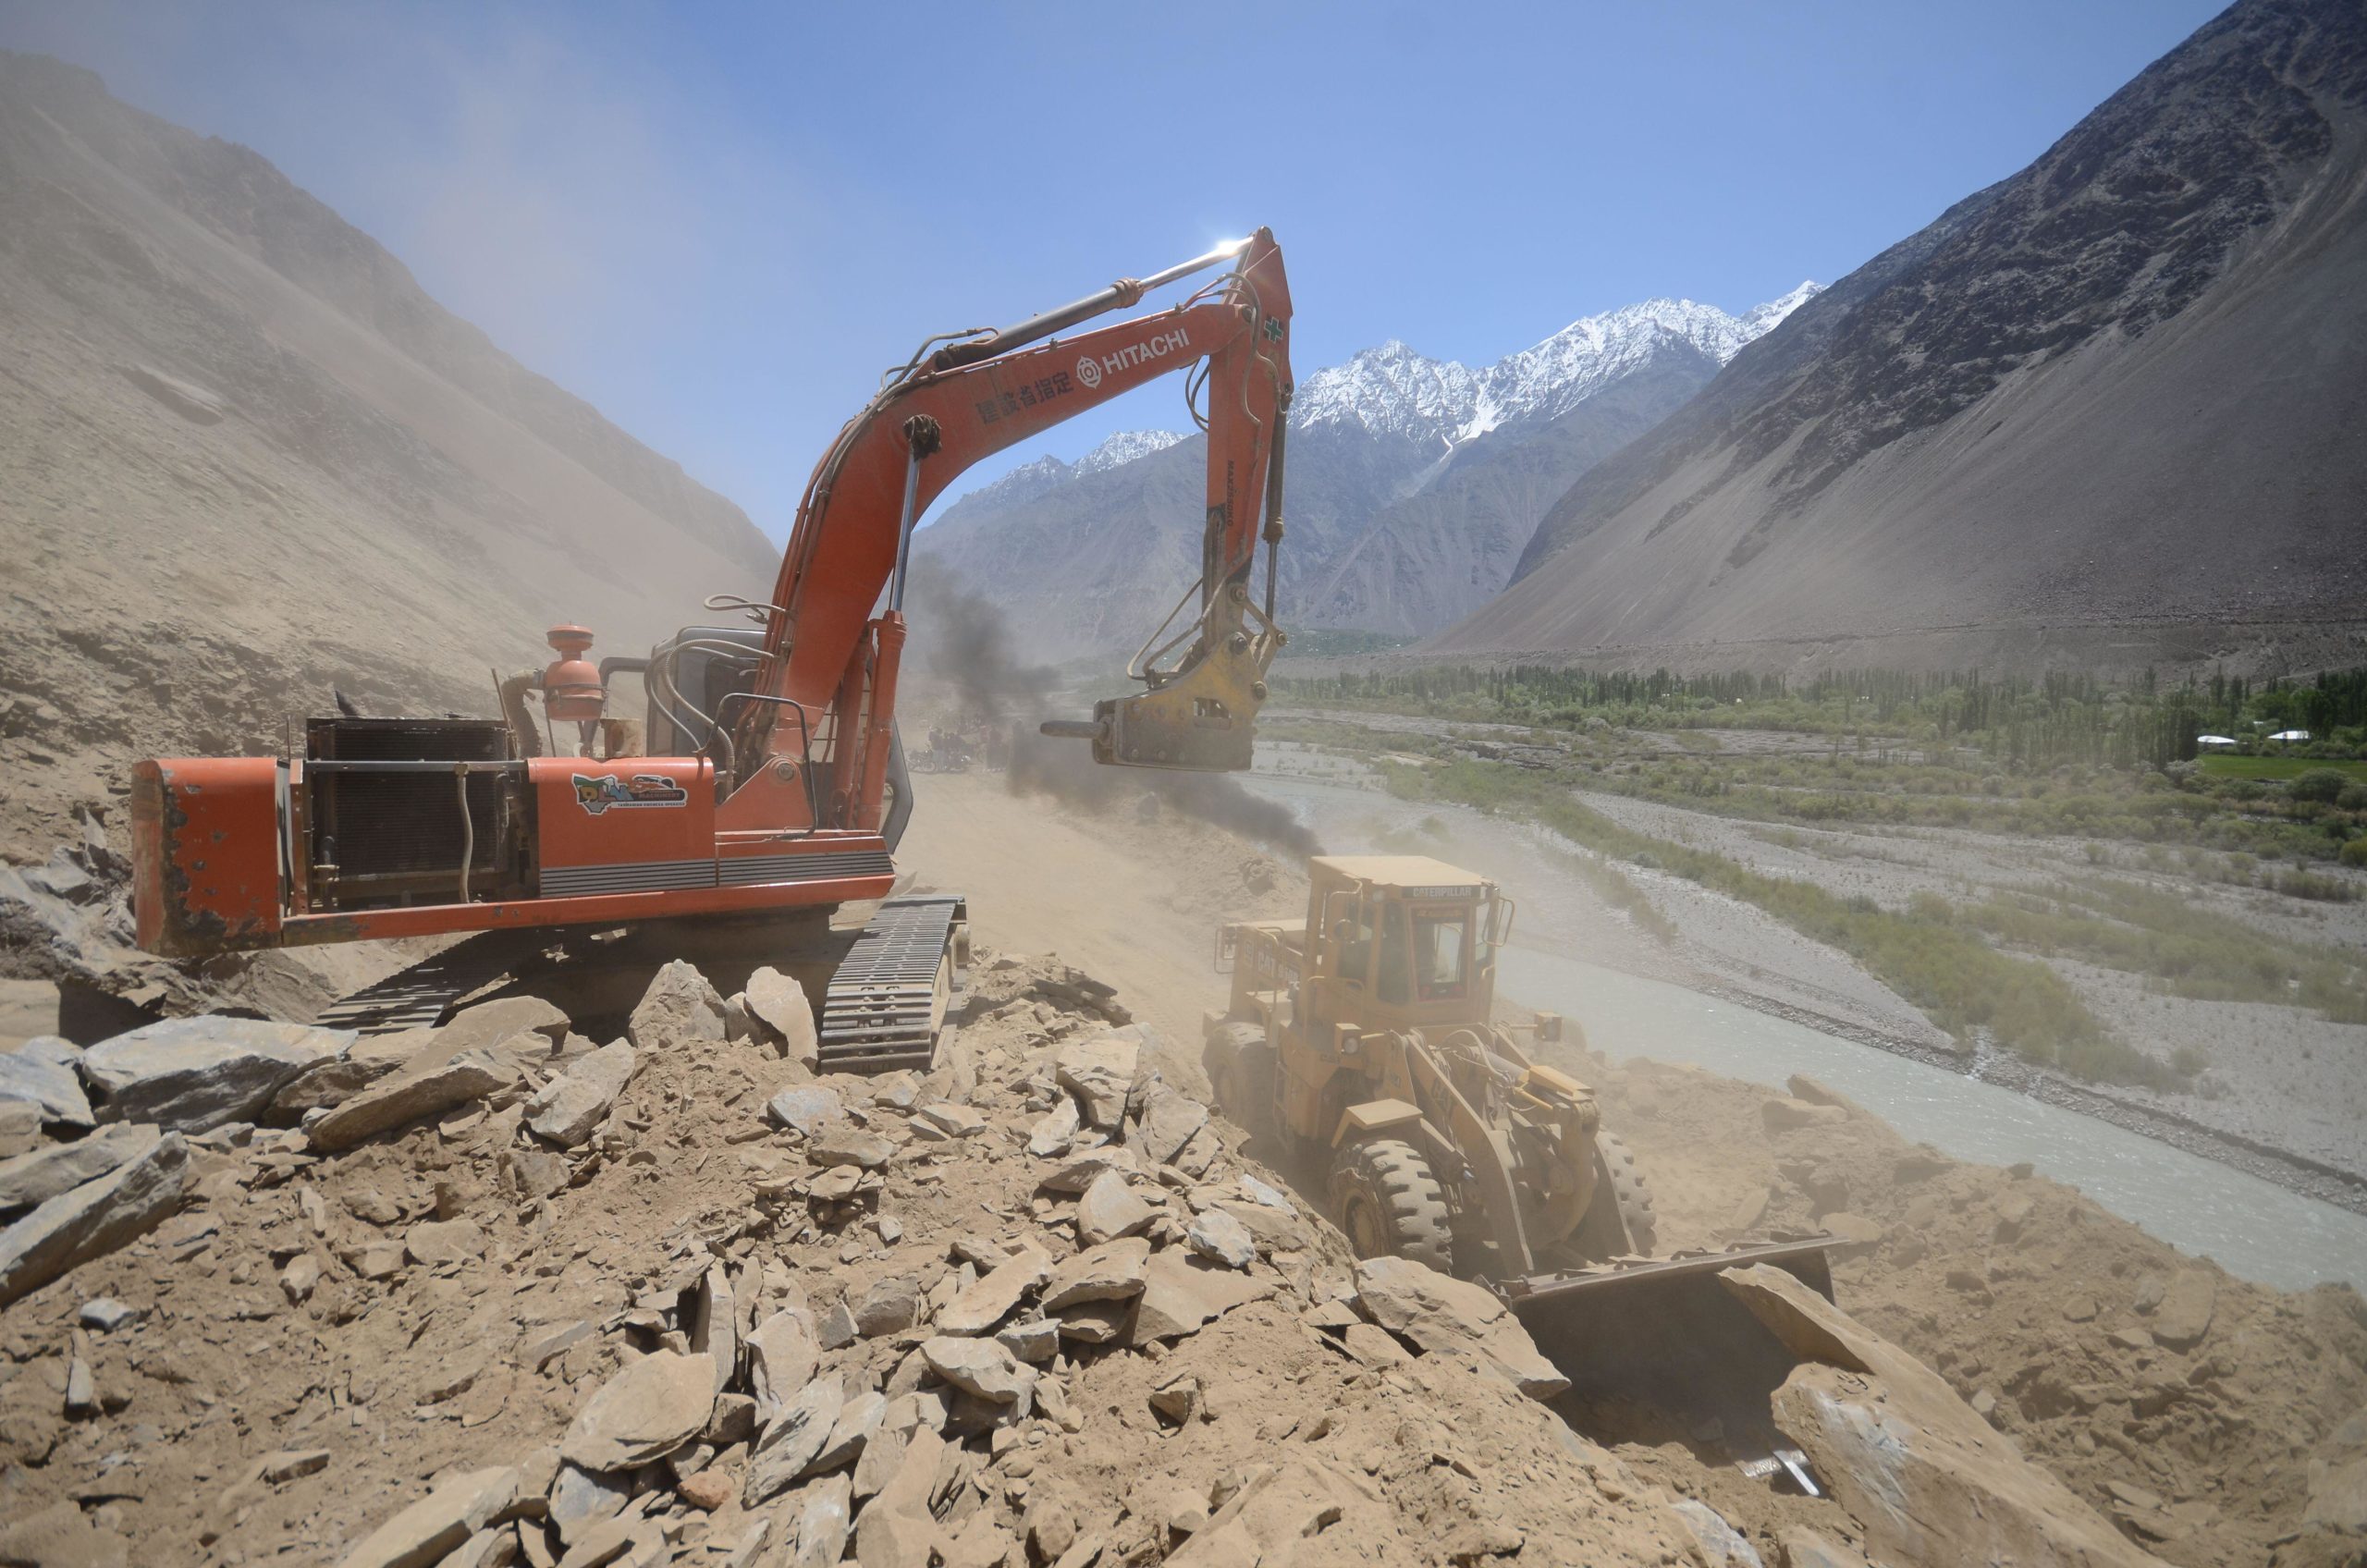 <p>Work in May 2022 on a road in Peshawar, Khyber Pakhtunkhwa province in Pakistan. The Pakistani government has decided to build a motorway between Peshawar and Kabul; experts say the expansion of rail and road corridors into Afghanistan highlights the need for environmental assessment that previous CPEC projects have rarely received. (Image: Alamy)</p>